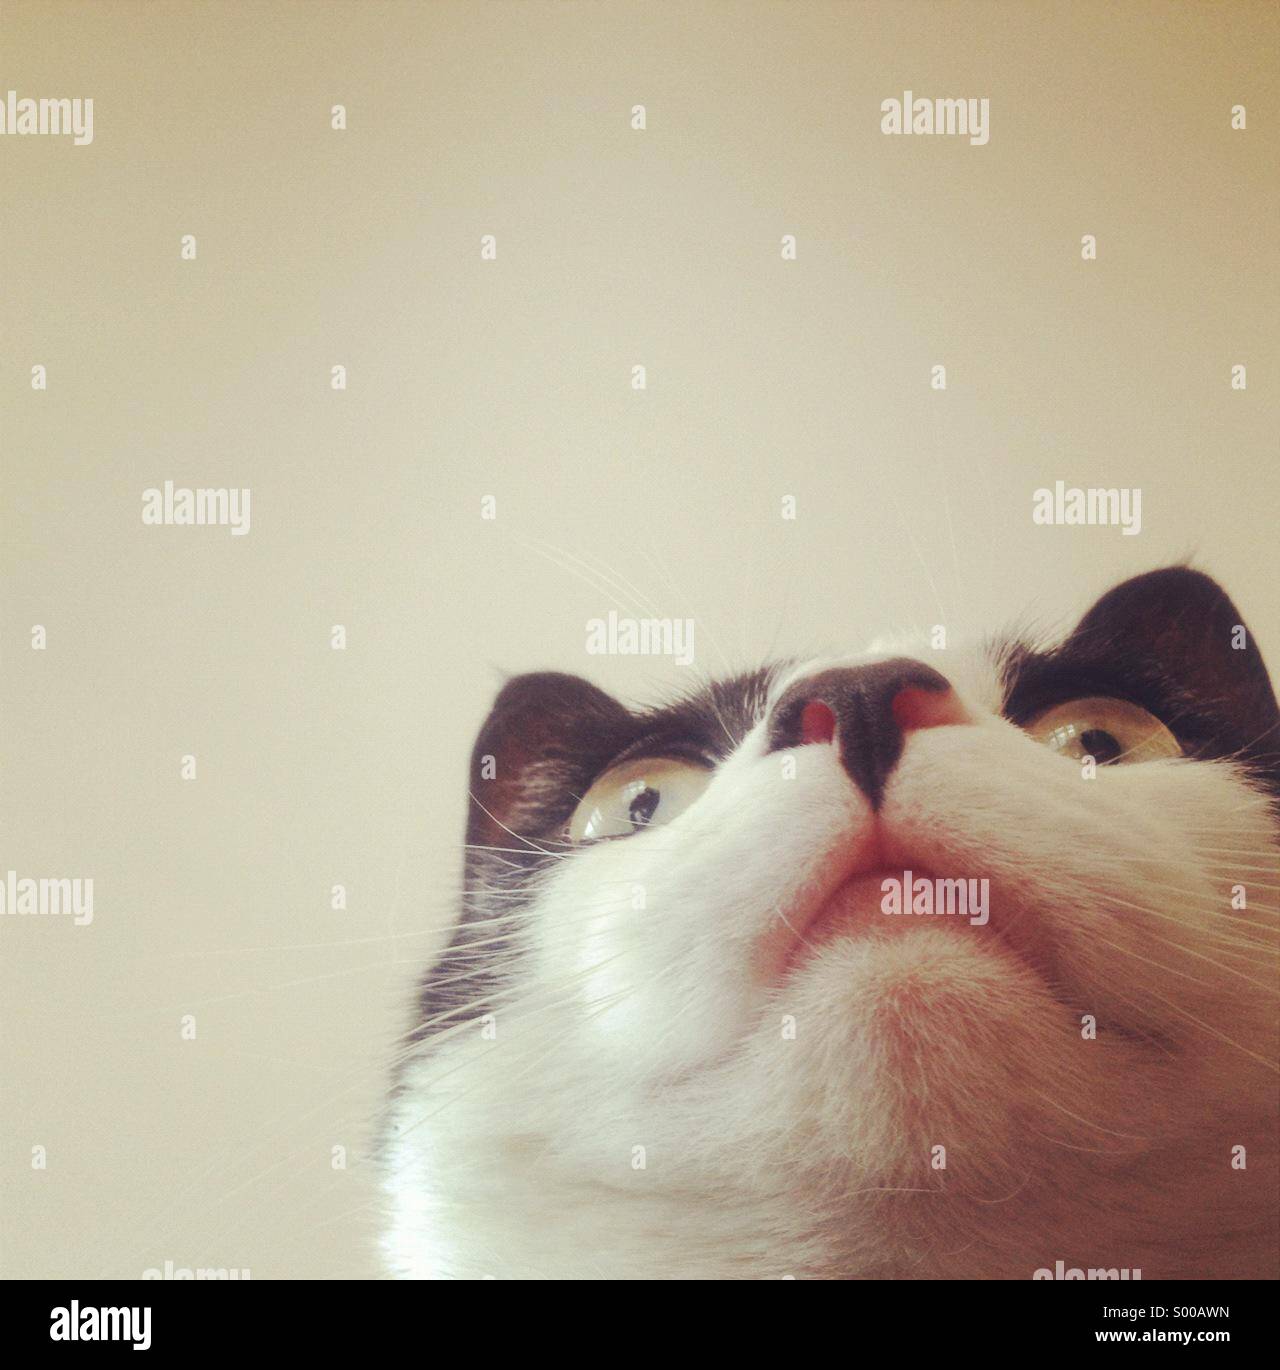 Looking up at the underside of a cat's chin Stock Photo